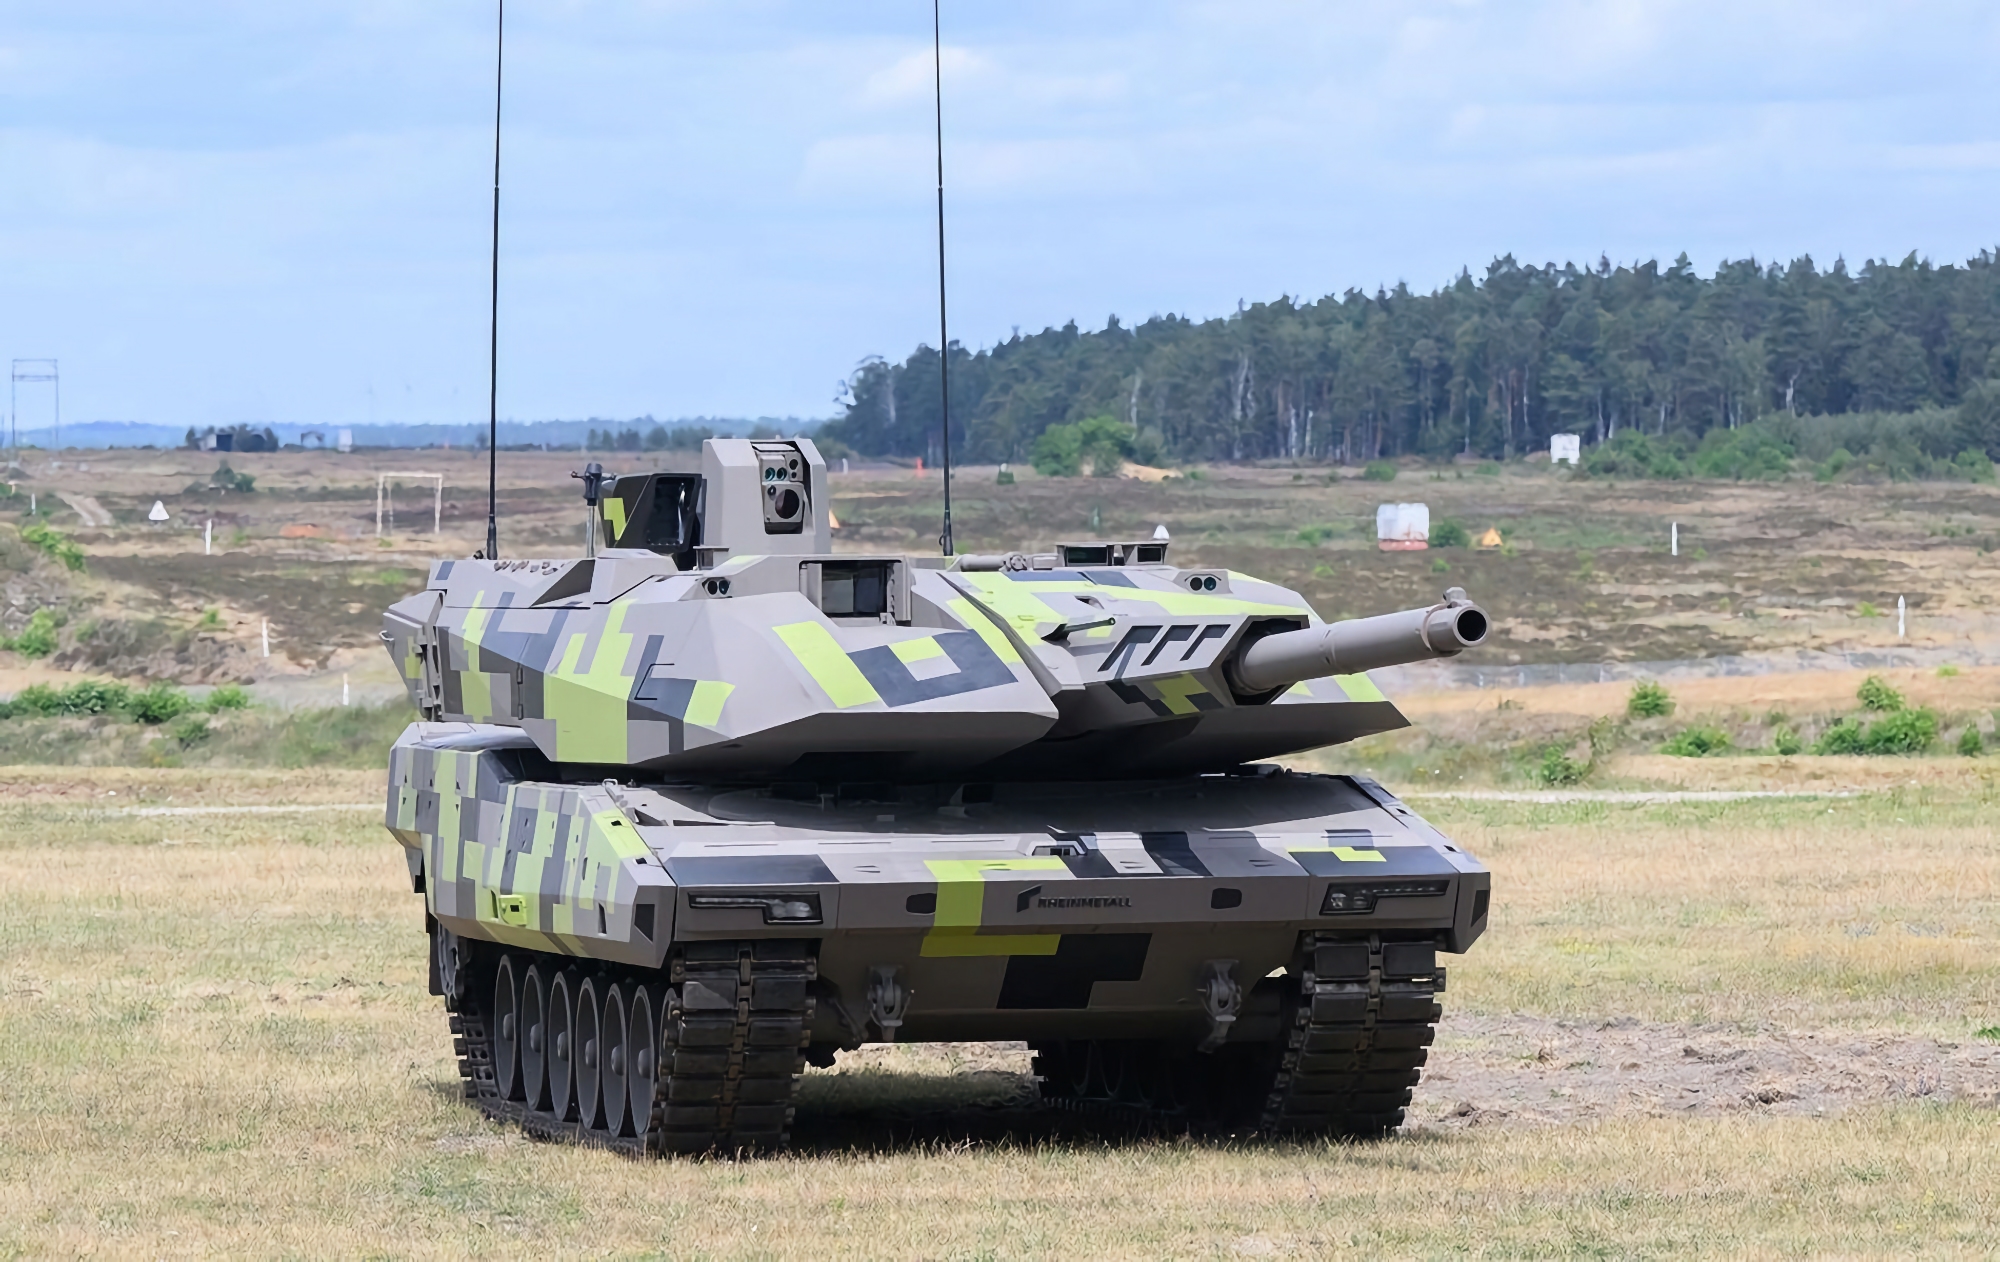 Rheinmetall plans to produce ammunition, Panther KF51 tanks and air defence systems in Ukraine